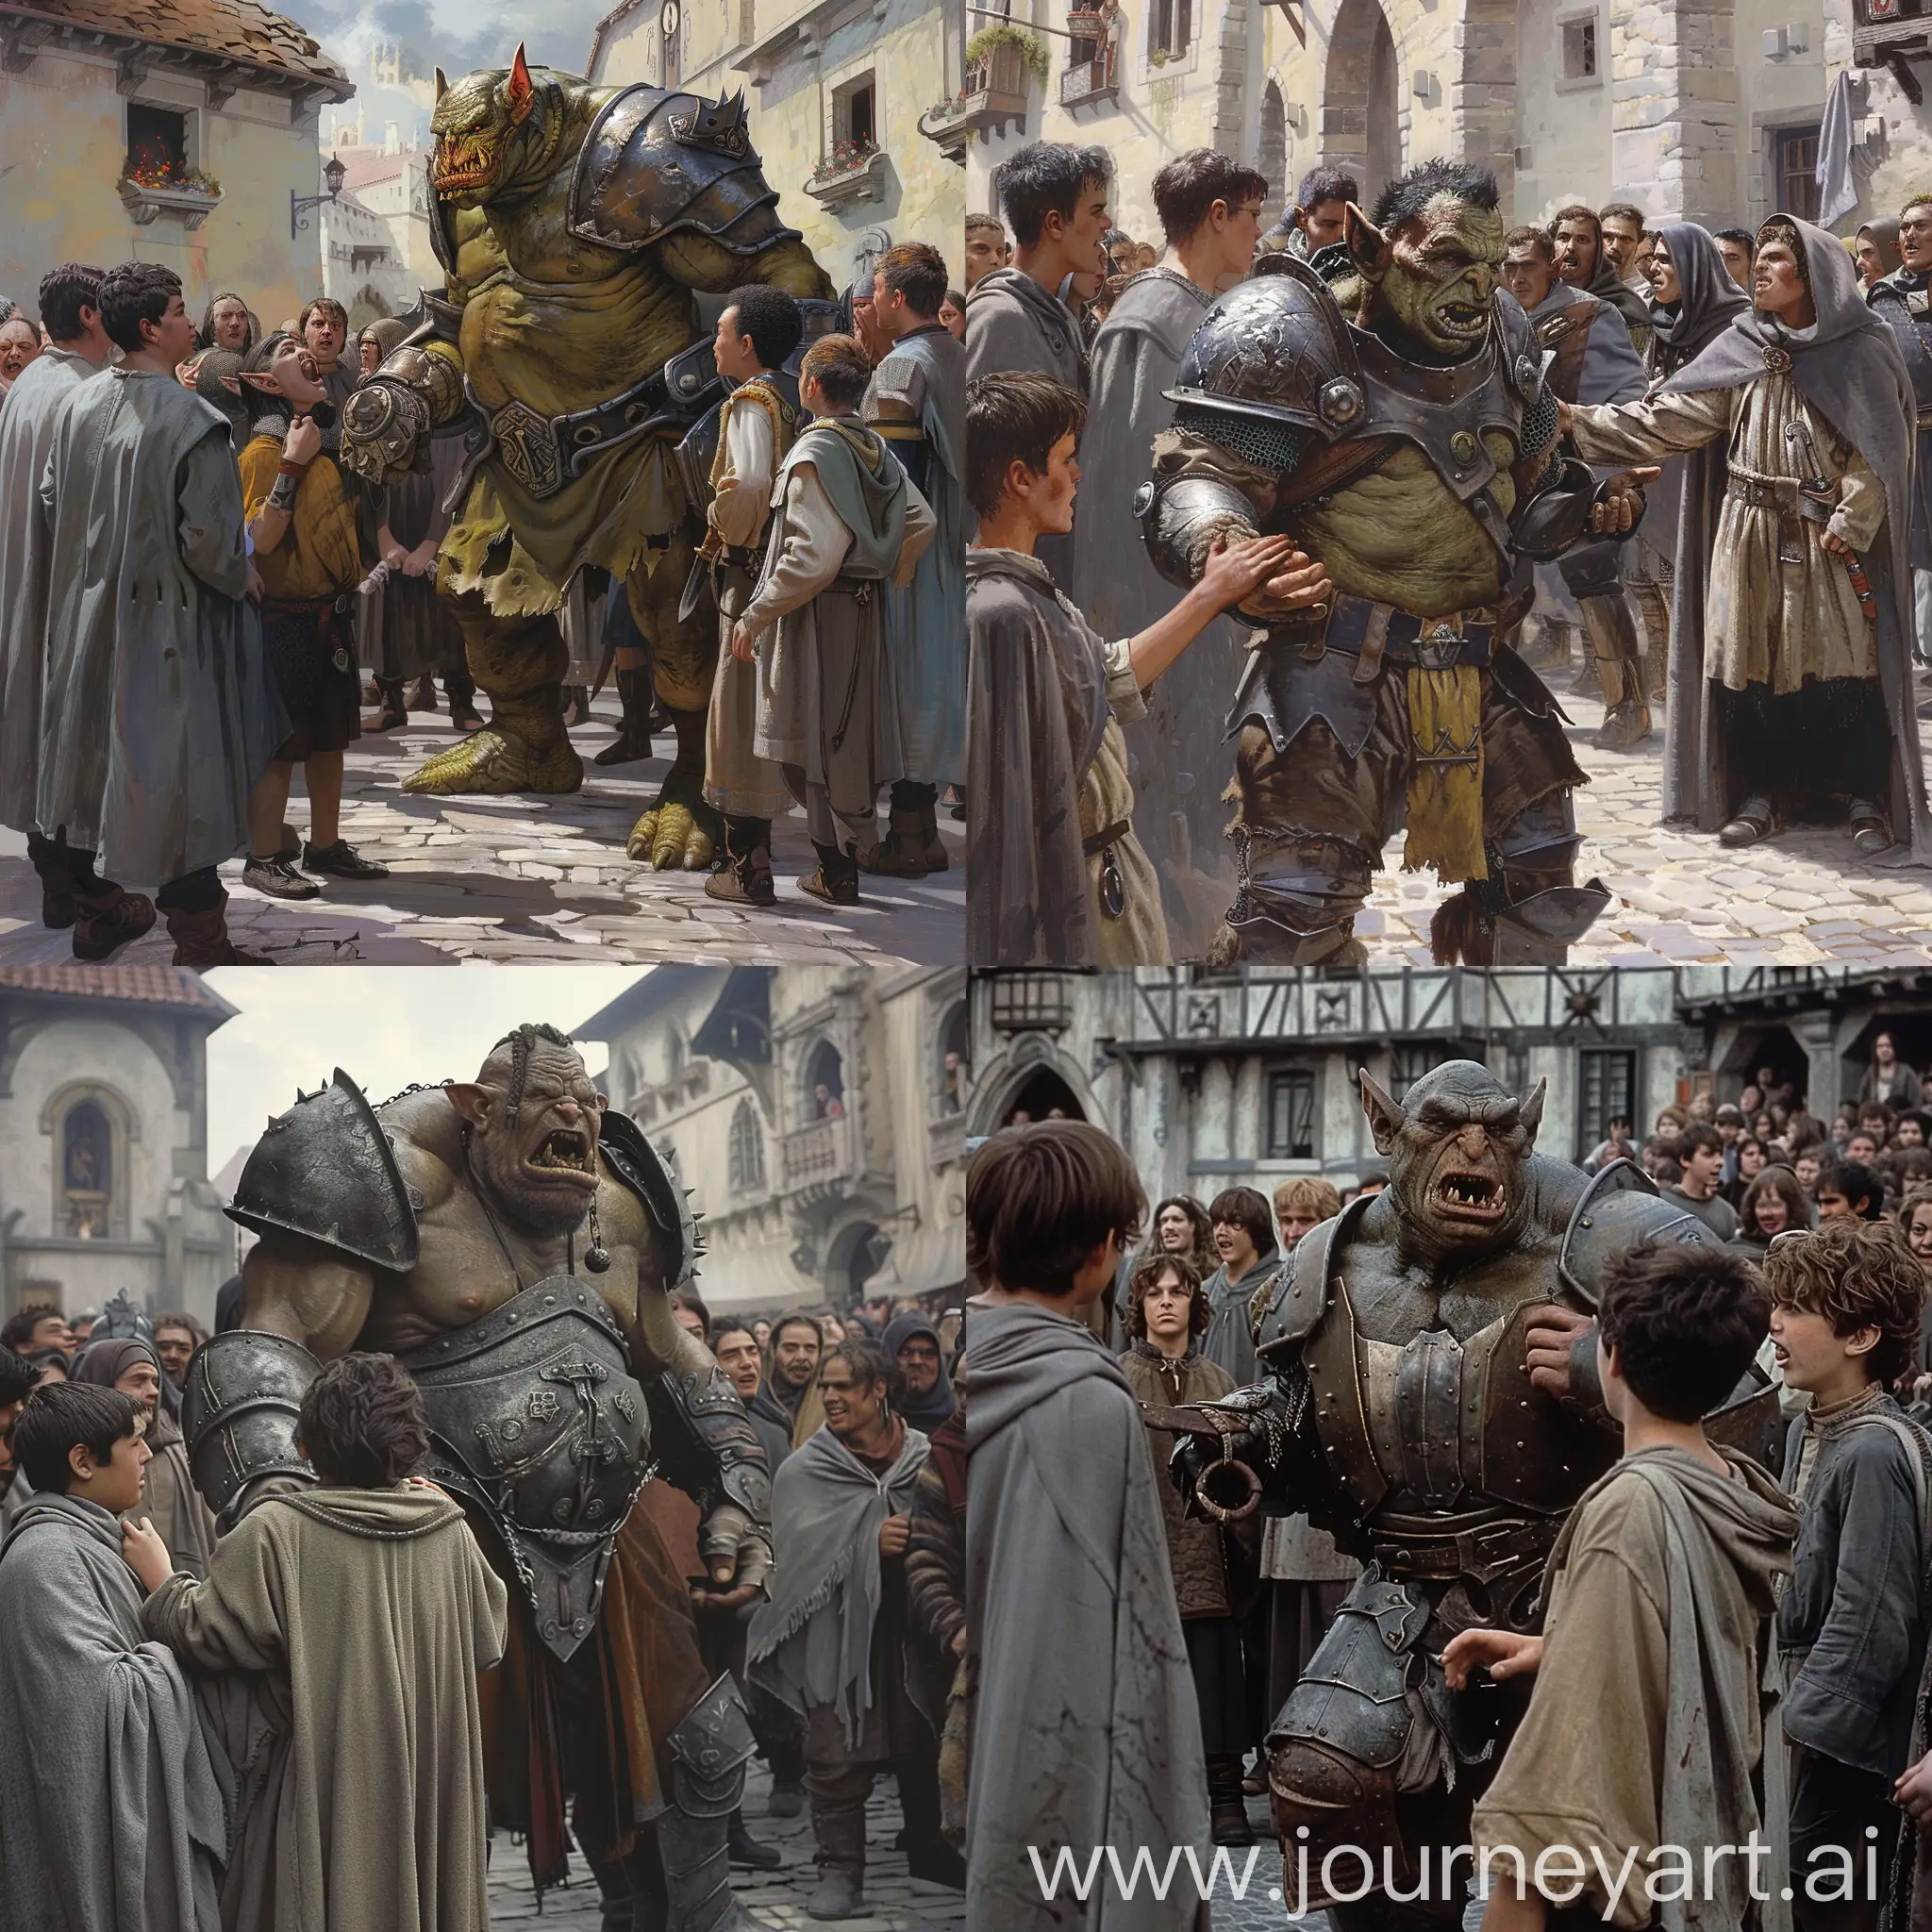 Medieval-Square-Confrontation-Orc-in-Iron-Armor-Rebukes-Defiant-Youth